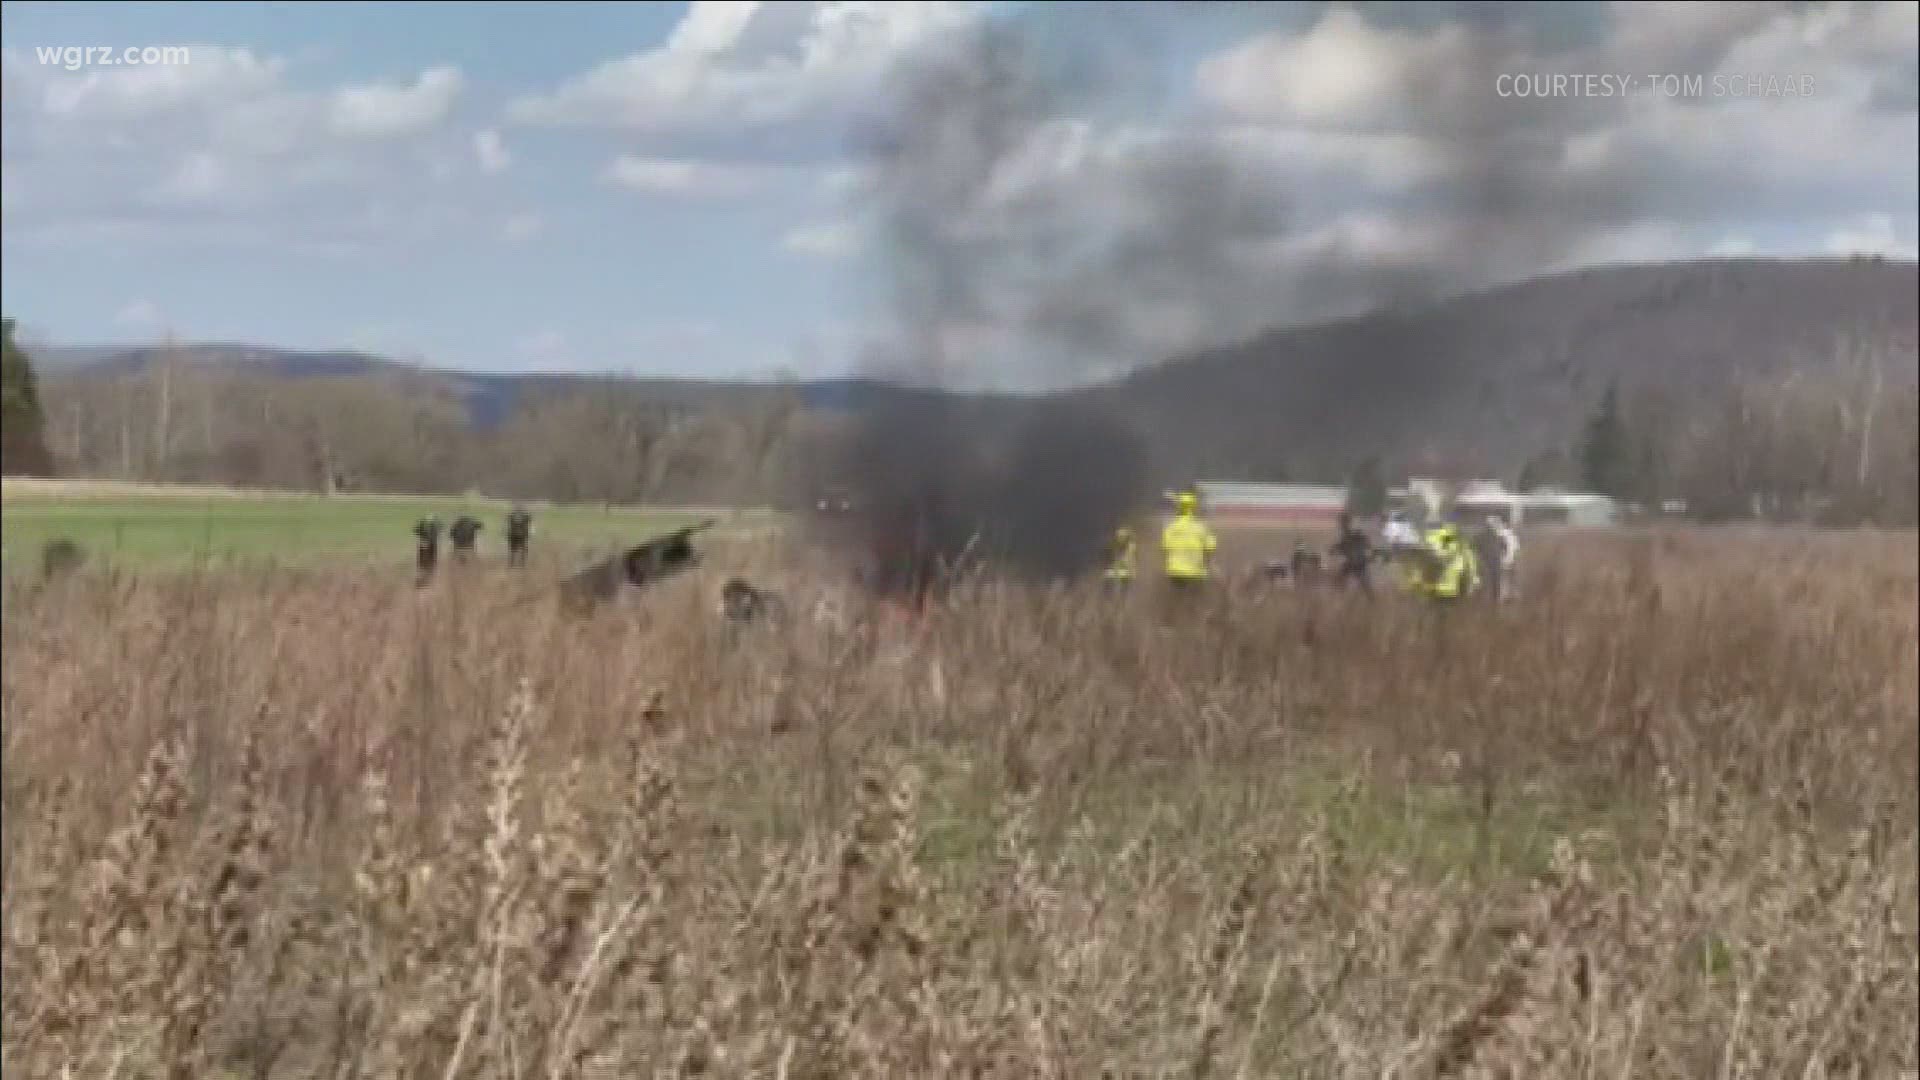 The Cattaraugus County Sheriff's Office says a small plane crashed Wednesday afternoon in Great Valley. The cause of the crash is unclear at this time.